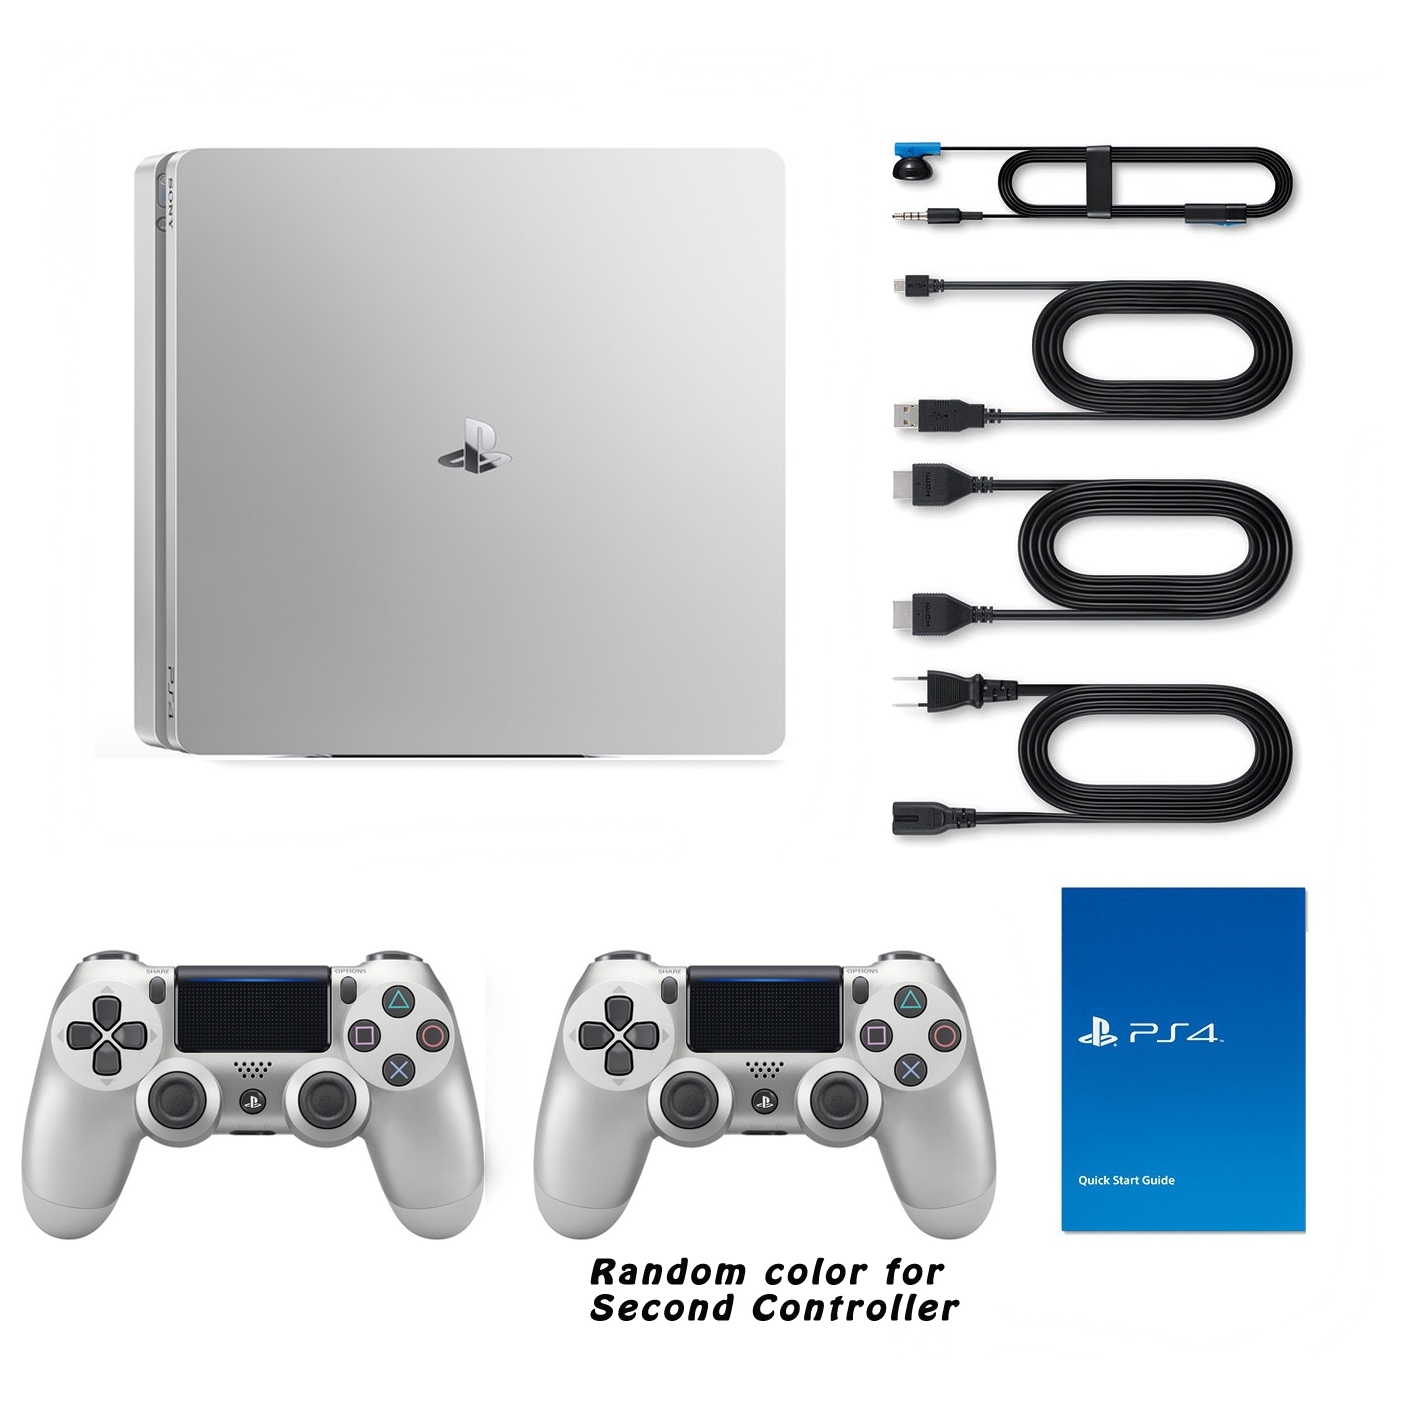 Buy online Best price of Sony PS4 Slim Gaming Console 500GB Silver 